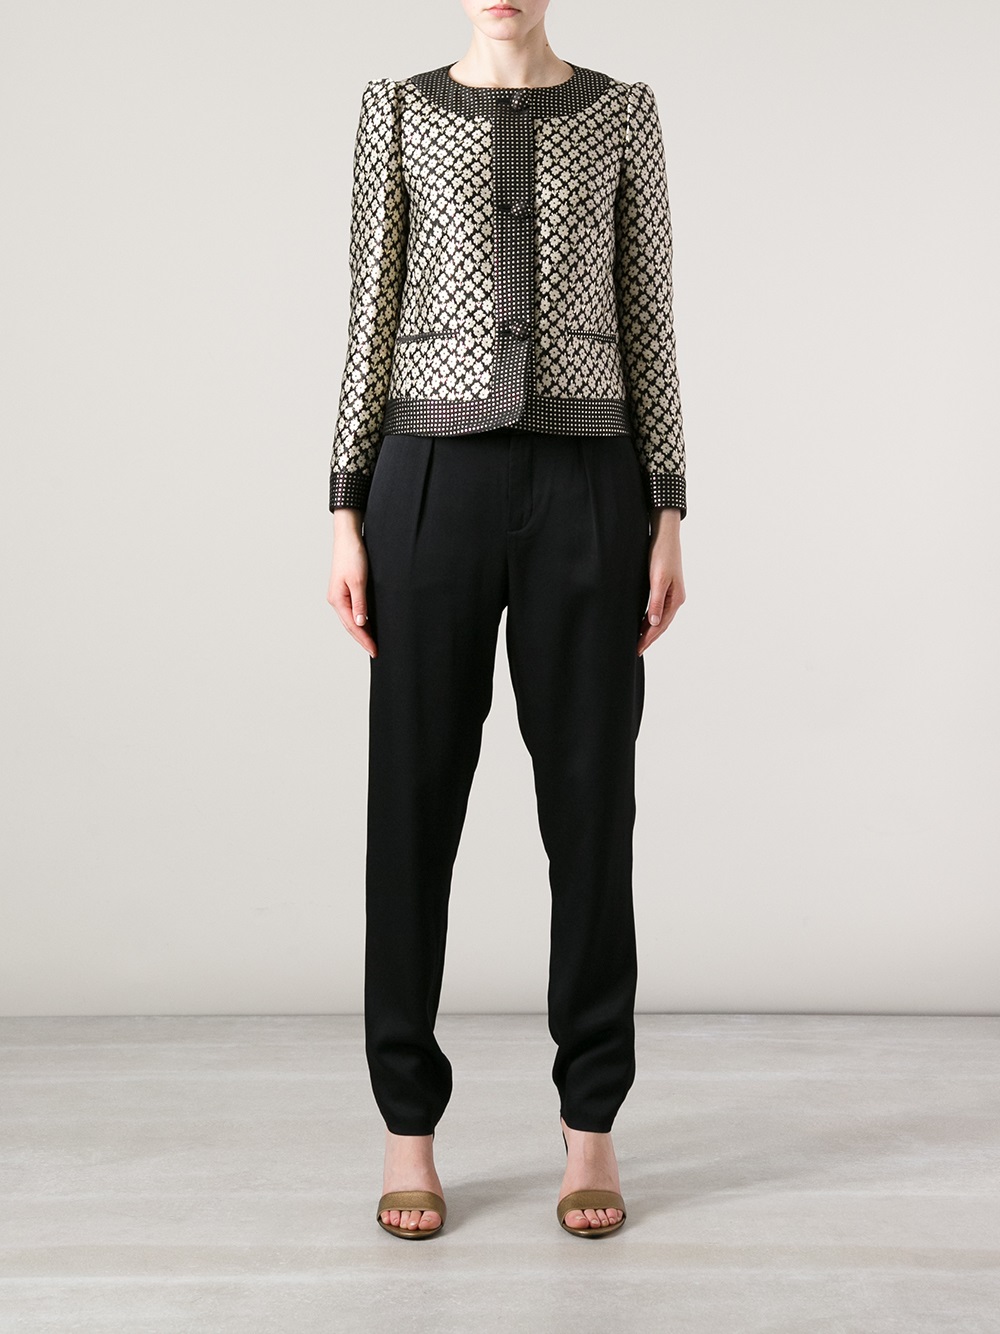 Lyst - Red Valentino Floral Jacquard Jacket in Gray